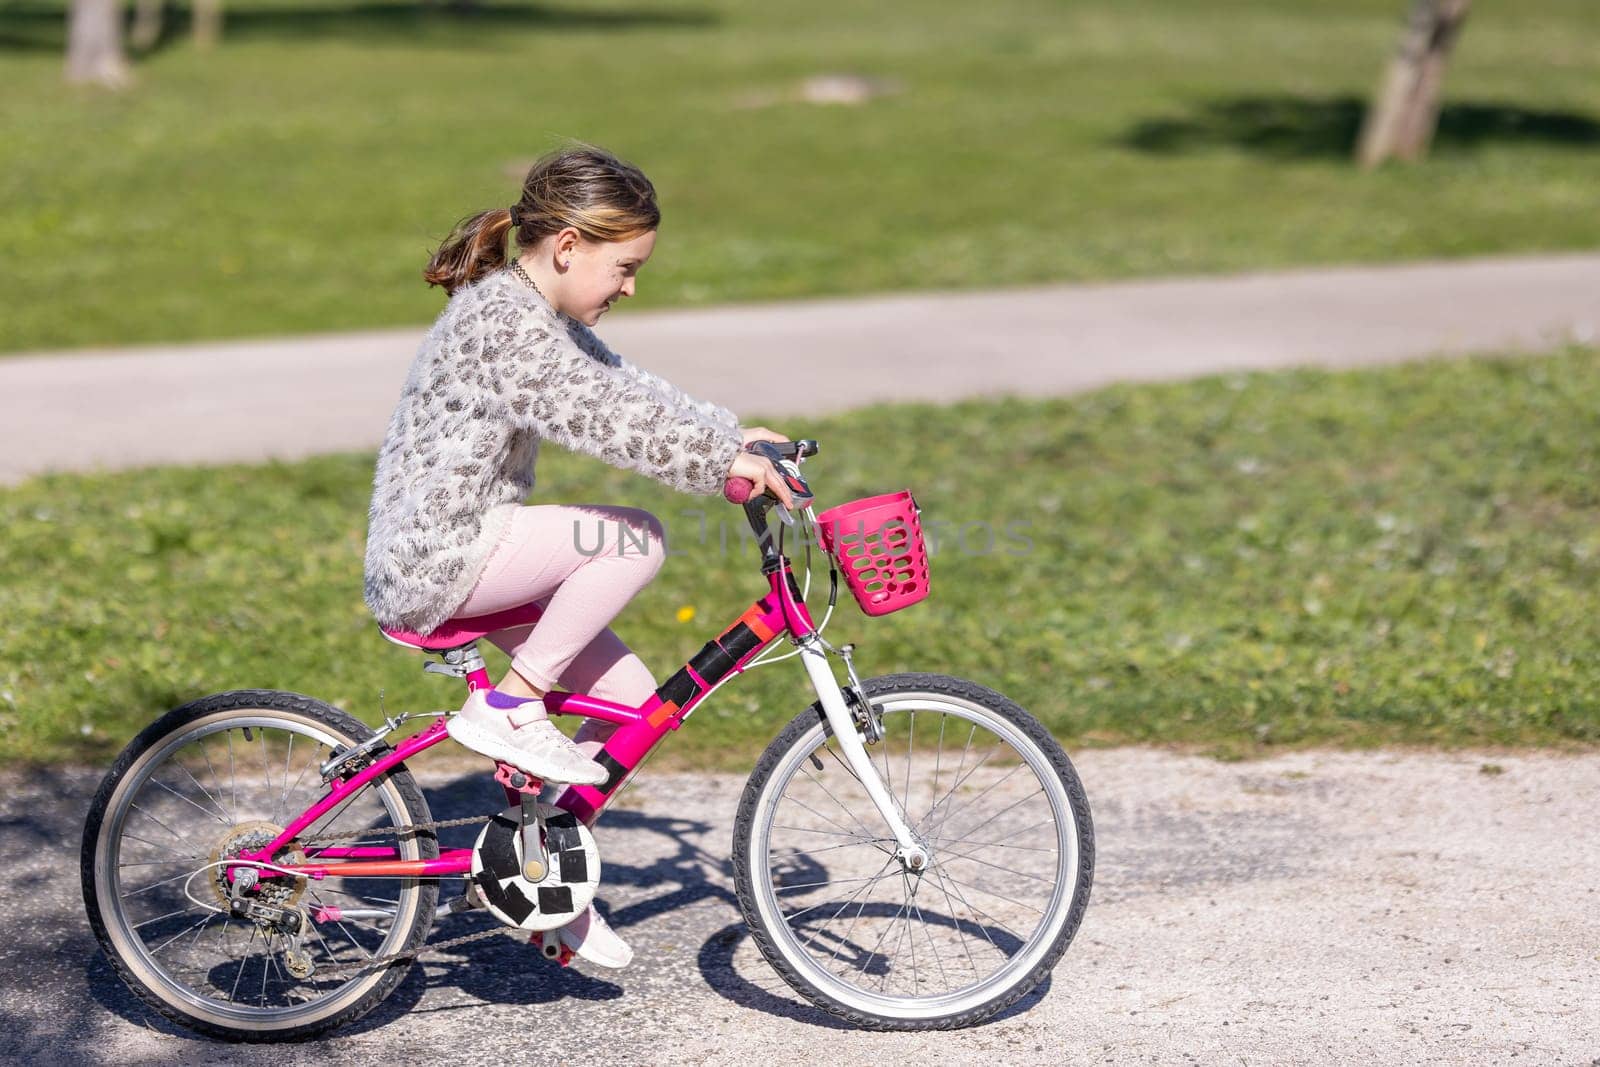 A young girl is riding a pink bike with a basket on the front. She is wearing a pink jacket and pink pants. The scene is set in a park with a grassy area